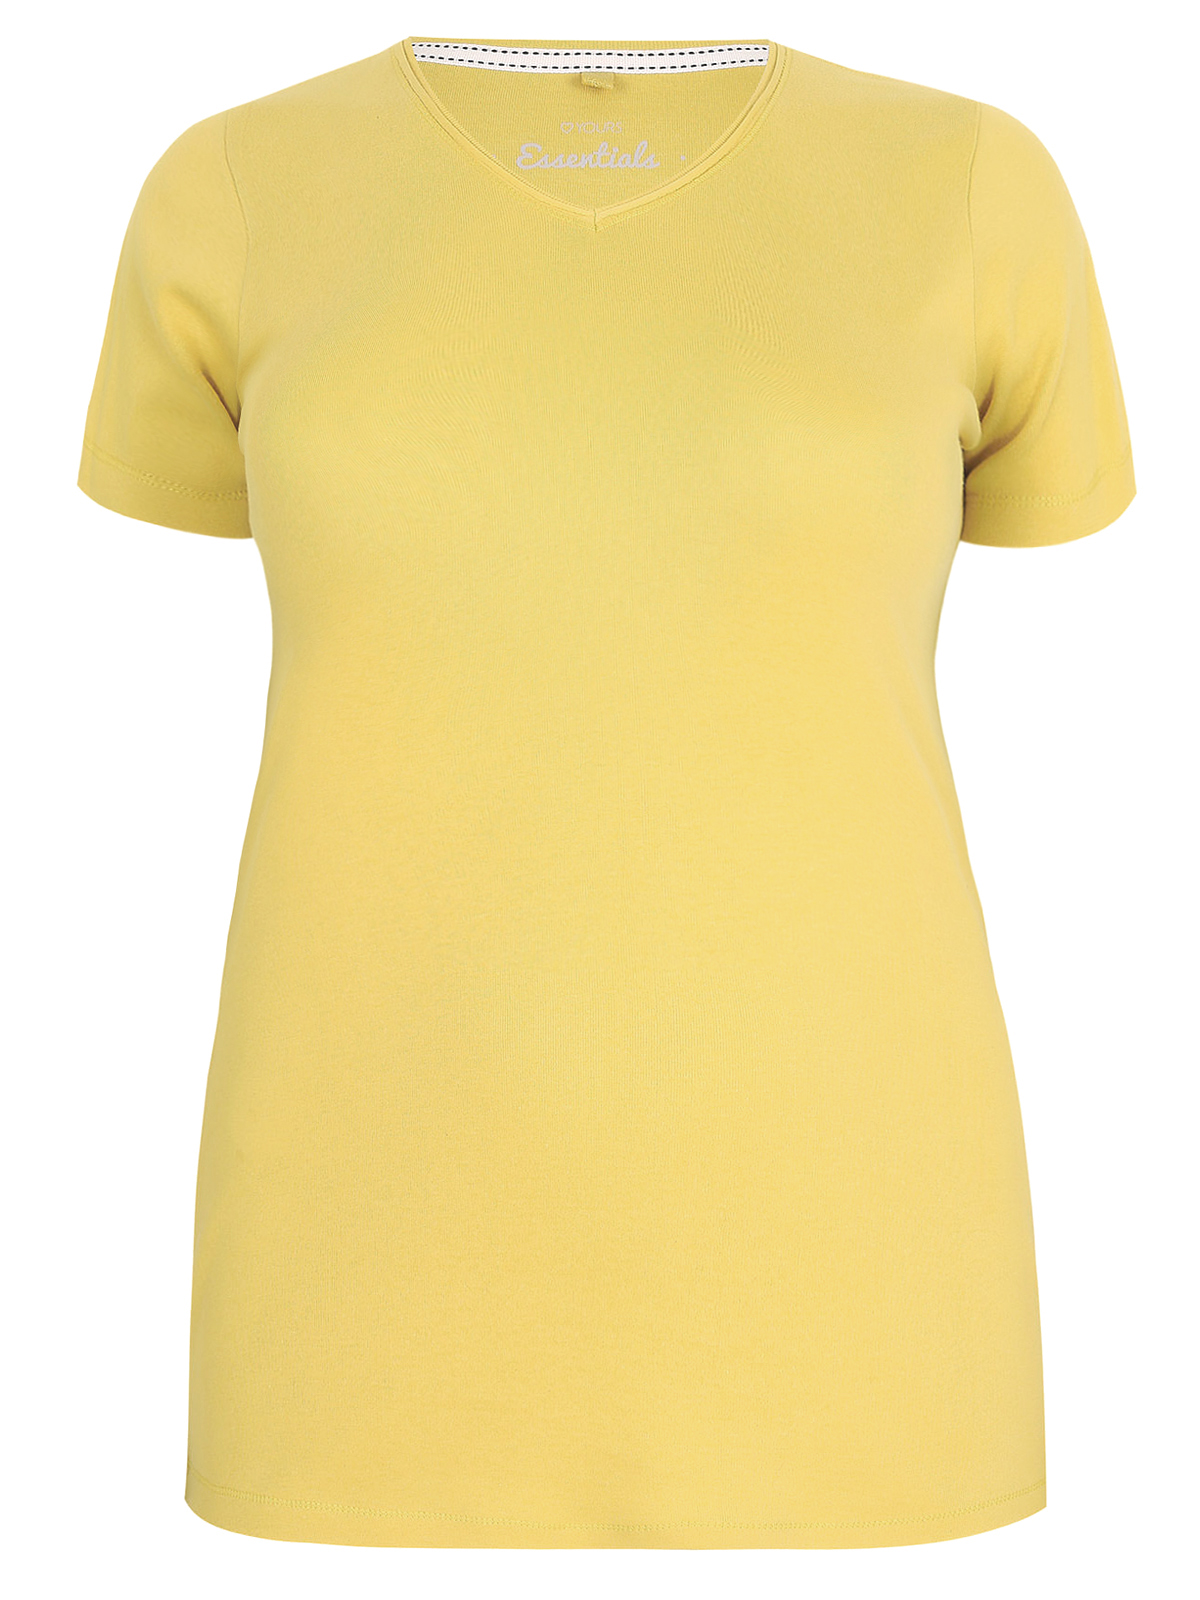 Y0URS - - Yours YELLOW Short Sleeved V-Neck T-Shirt Top - Plus Size 16 ...